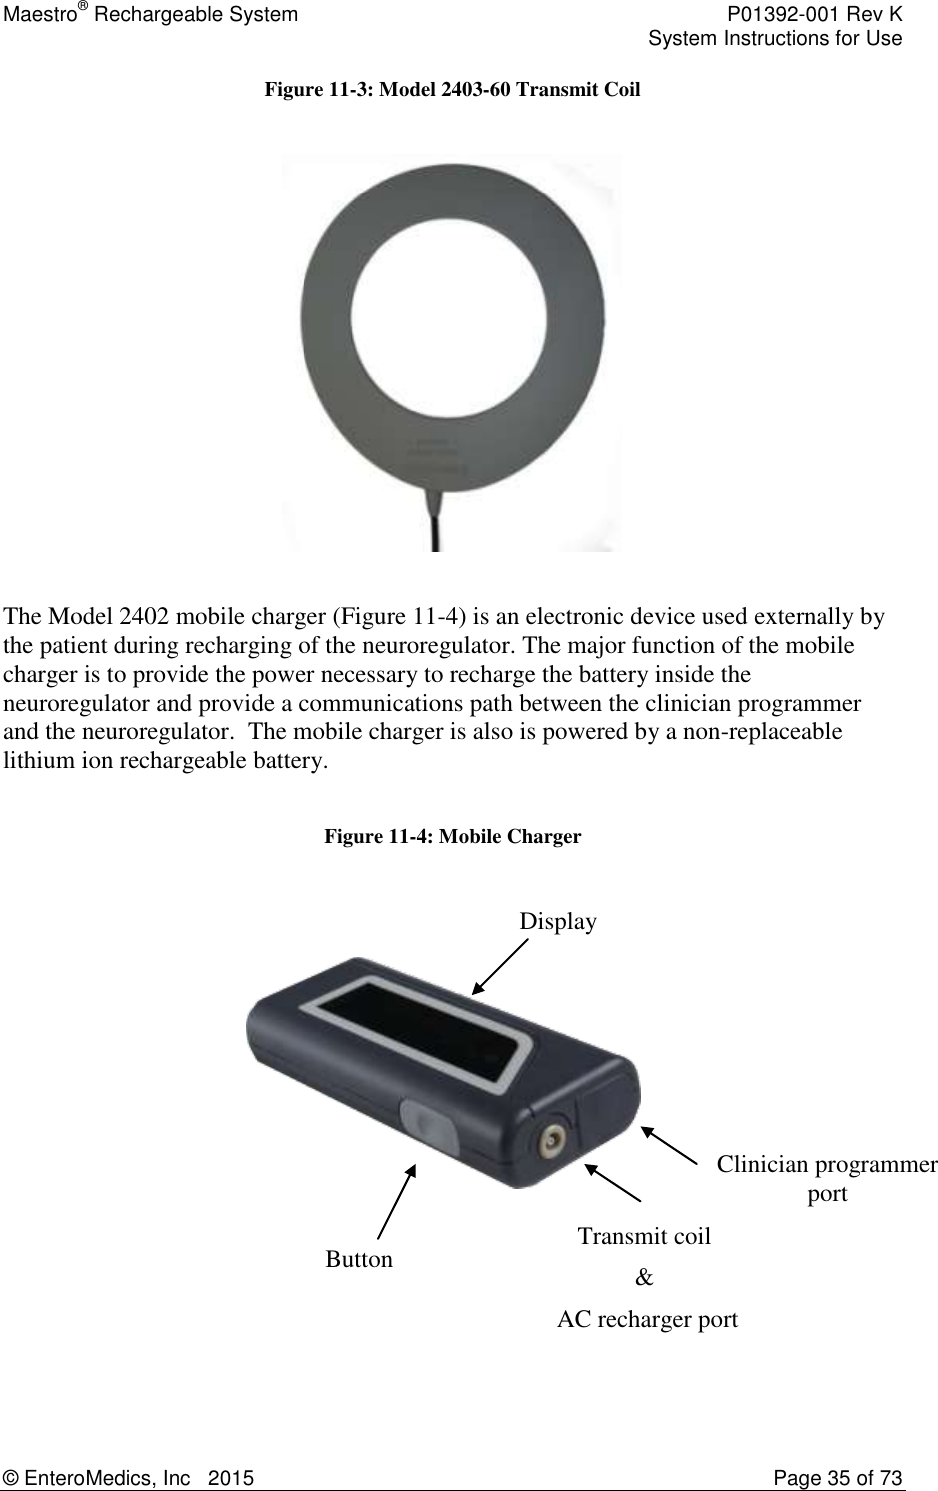 Maestro® Rechargeable System    P01392-001 Rev K     System Instructions for Use  © EnteroMedics, Inc   2015  Page 35 of 73  Figure 11-3: Model 2403-60 Transmit Coil    The Model 2402 mobile charger (Figure 11-4) is an electronic device used externally by the patient during recharging of the neuroregulator. The major function of the mobile charger is to provide the power necessary to recharge the battery inside the neuroregulator and provide a communications path between the clinician programmer and the neuroregulator.  The mobile charger is also is powered by a non-replaceable lithium ion rechargeable battery.    Figure 11-4: Mobile Charger      Display Clinician programmer port Button Transmit coil  &amp;  AC recharger port 